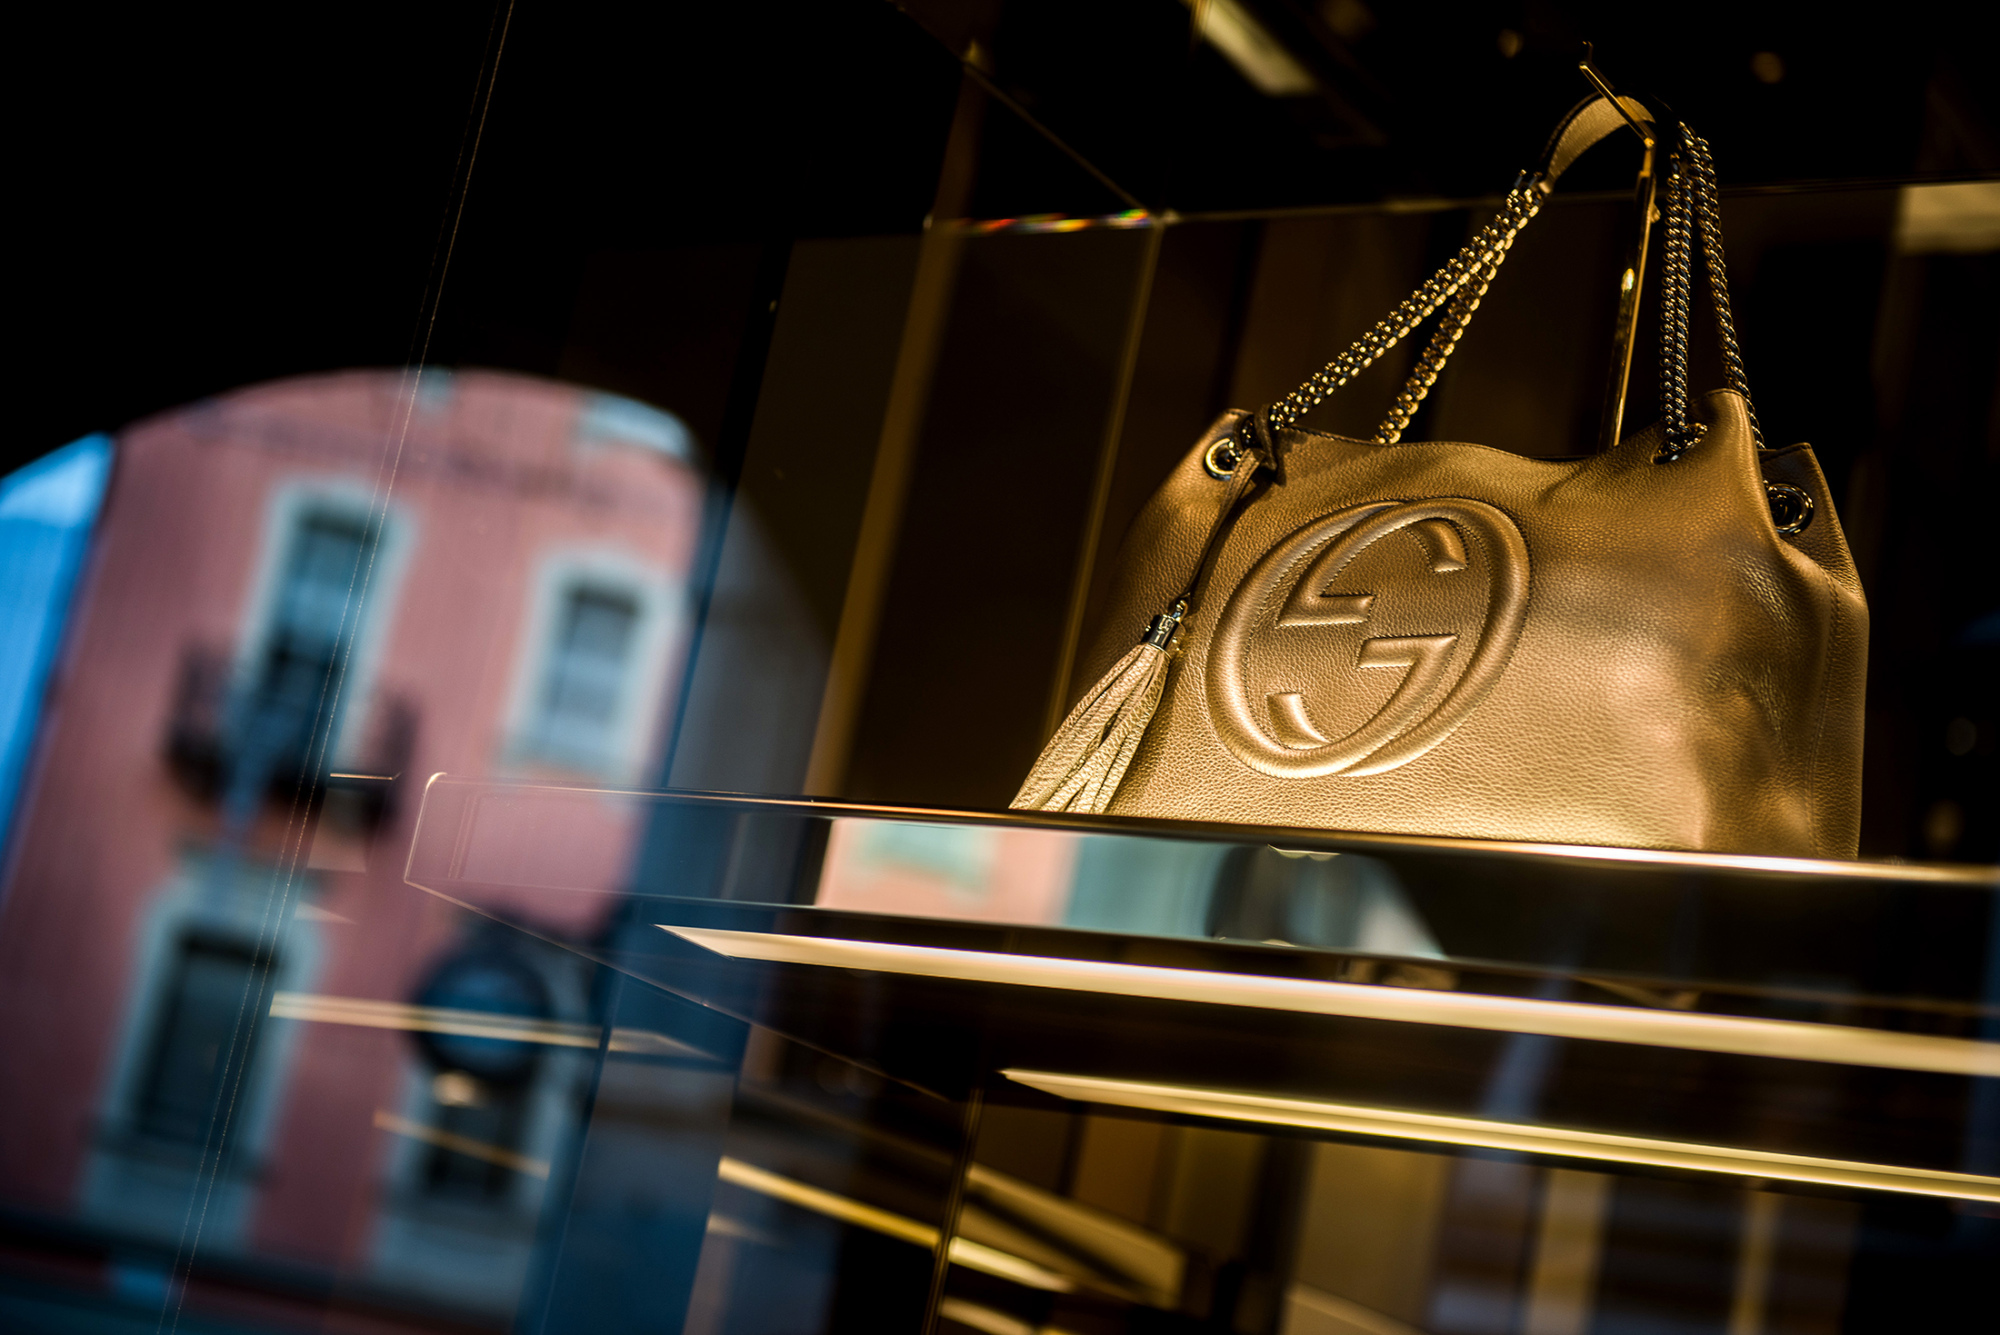 Gucci Sales Fall as Kering Lags Rivals Facing Luxury Slowdown - Bloomberg